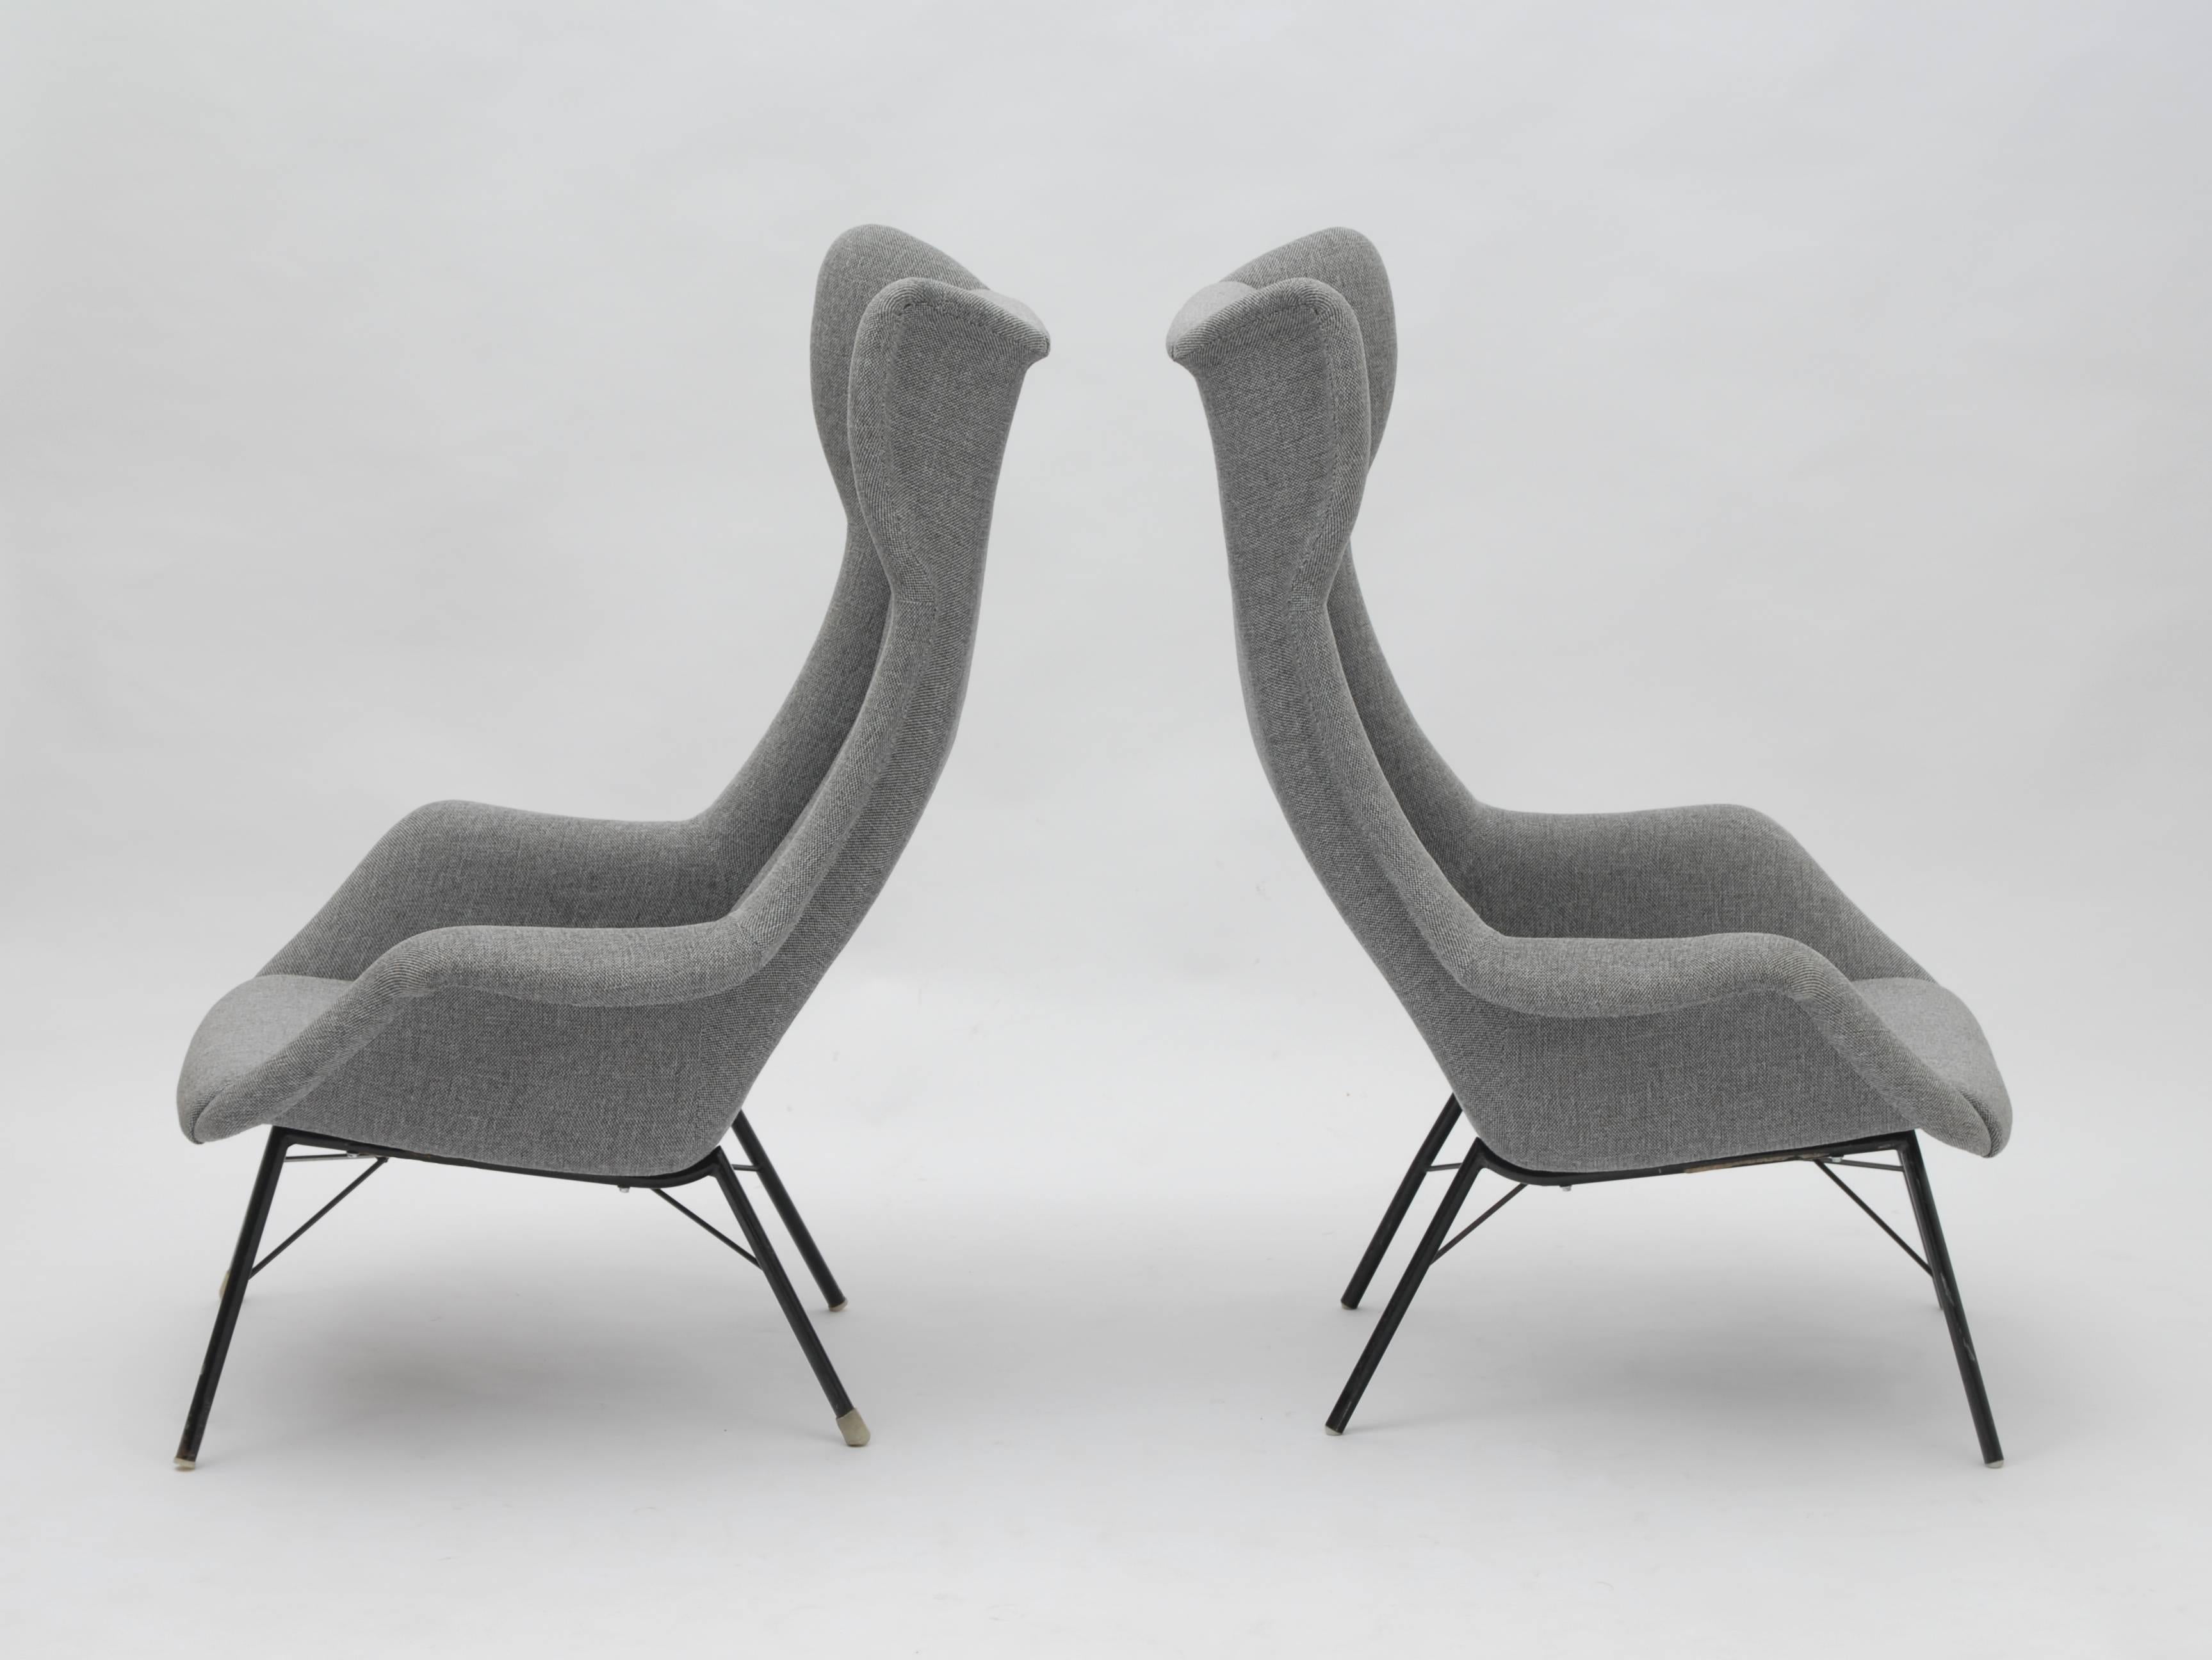 Stunning wingback easy chairs by Miroslav Navratil, manufactured in Czech by Cesky Nabytek around 1950.

These iconic chairs have a high quality metal base and new grey fabric upholstery. Their high backrests make them unique and very comfortable.